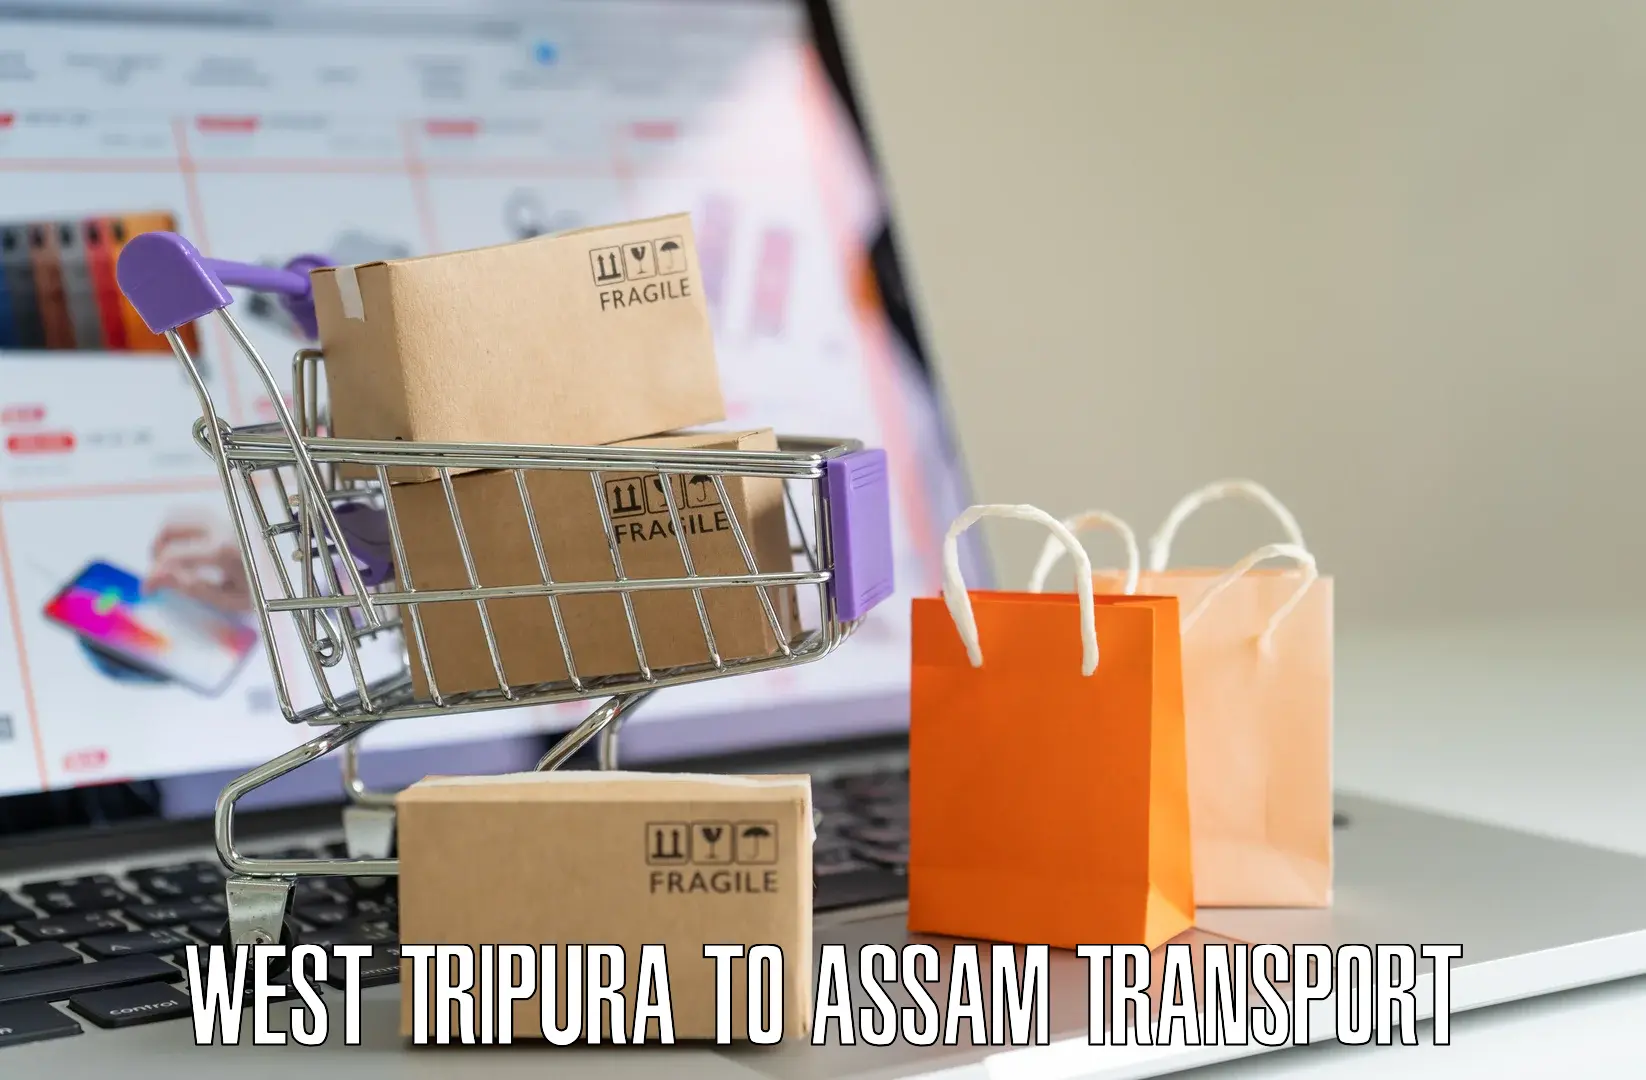 All India transport service West Tripura to Karbi Anglong